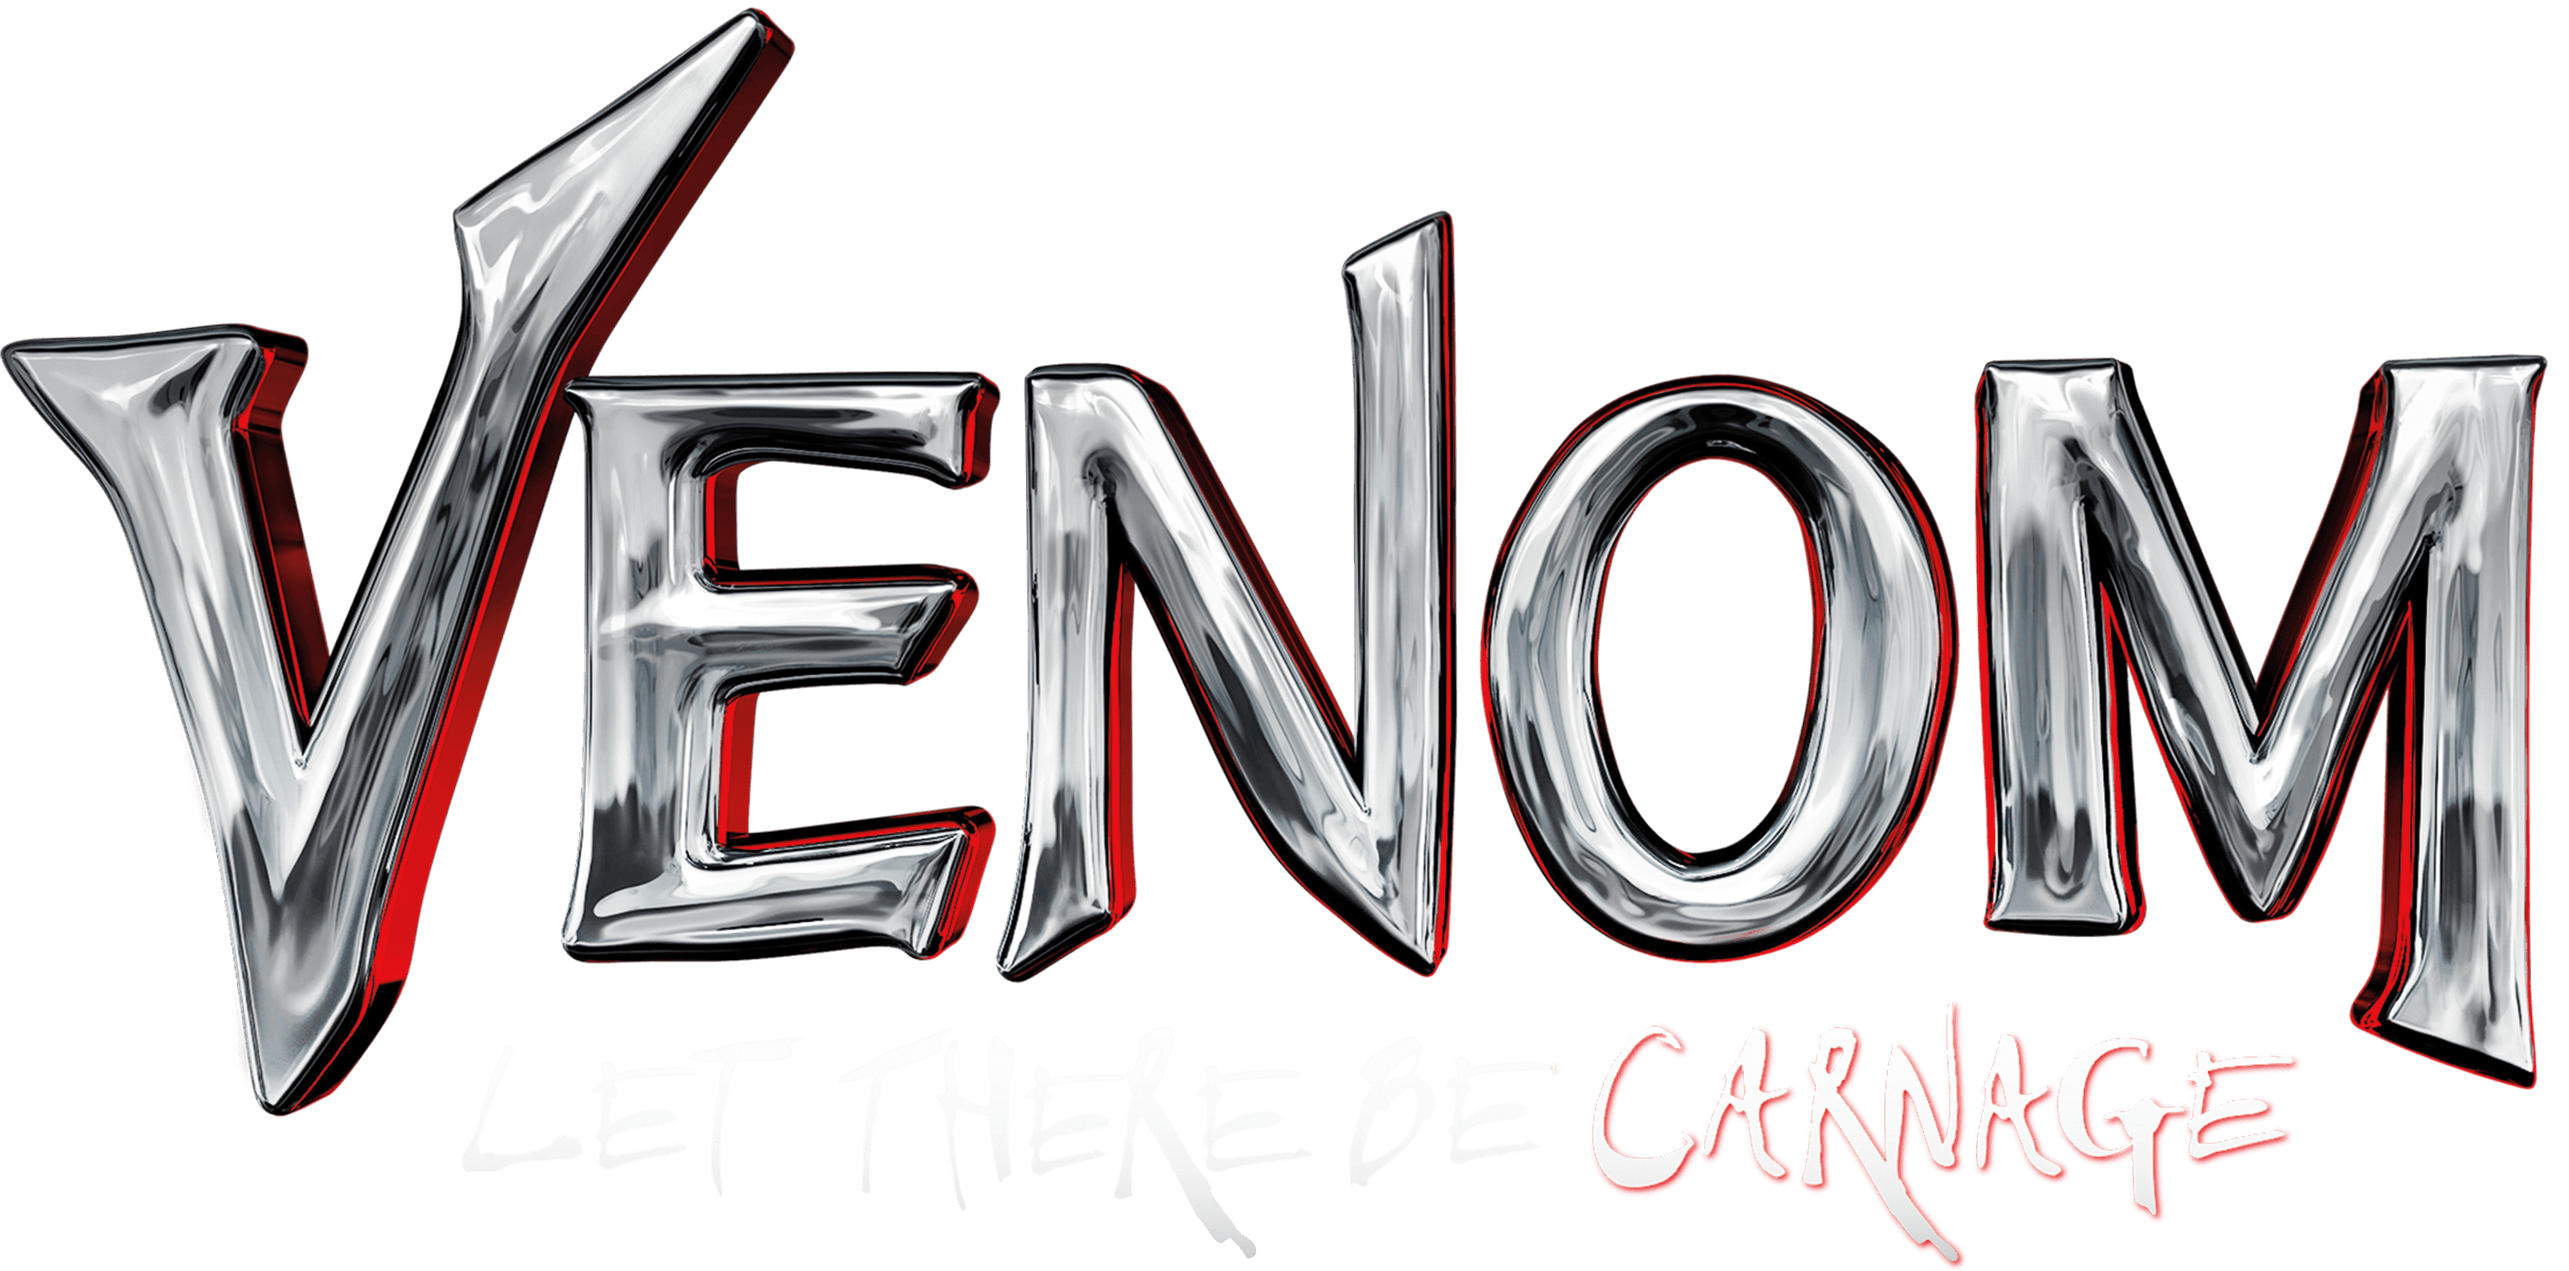 Venom: Let There Be Carnage logo